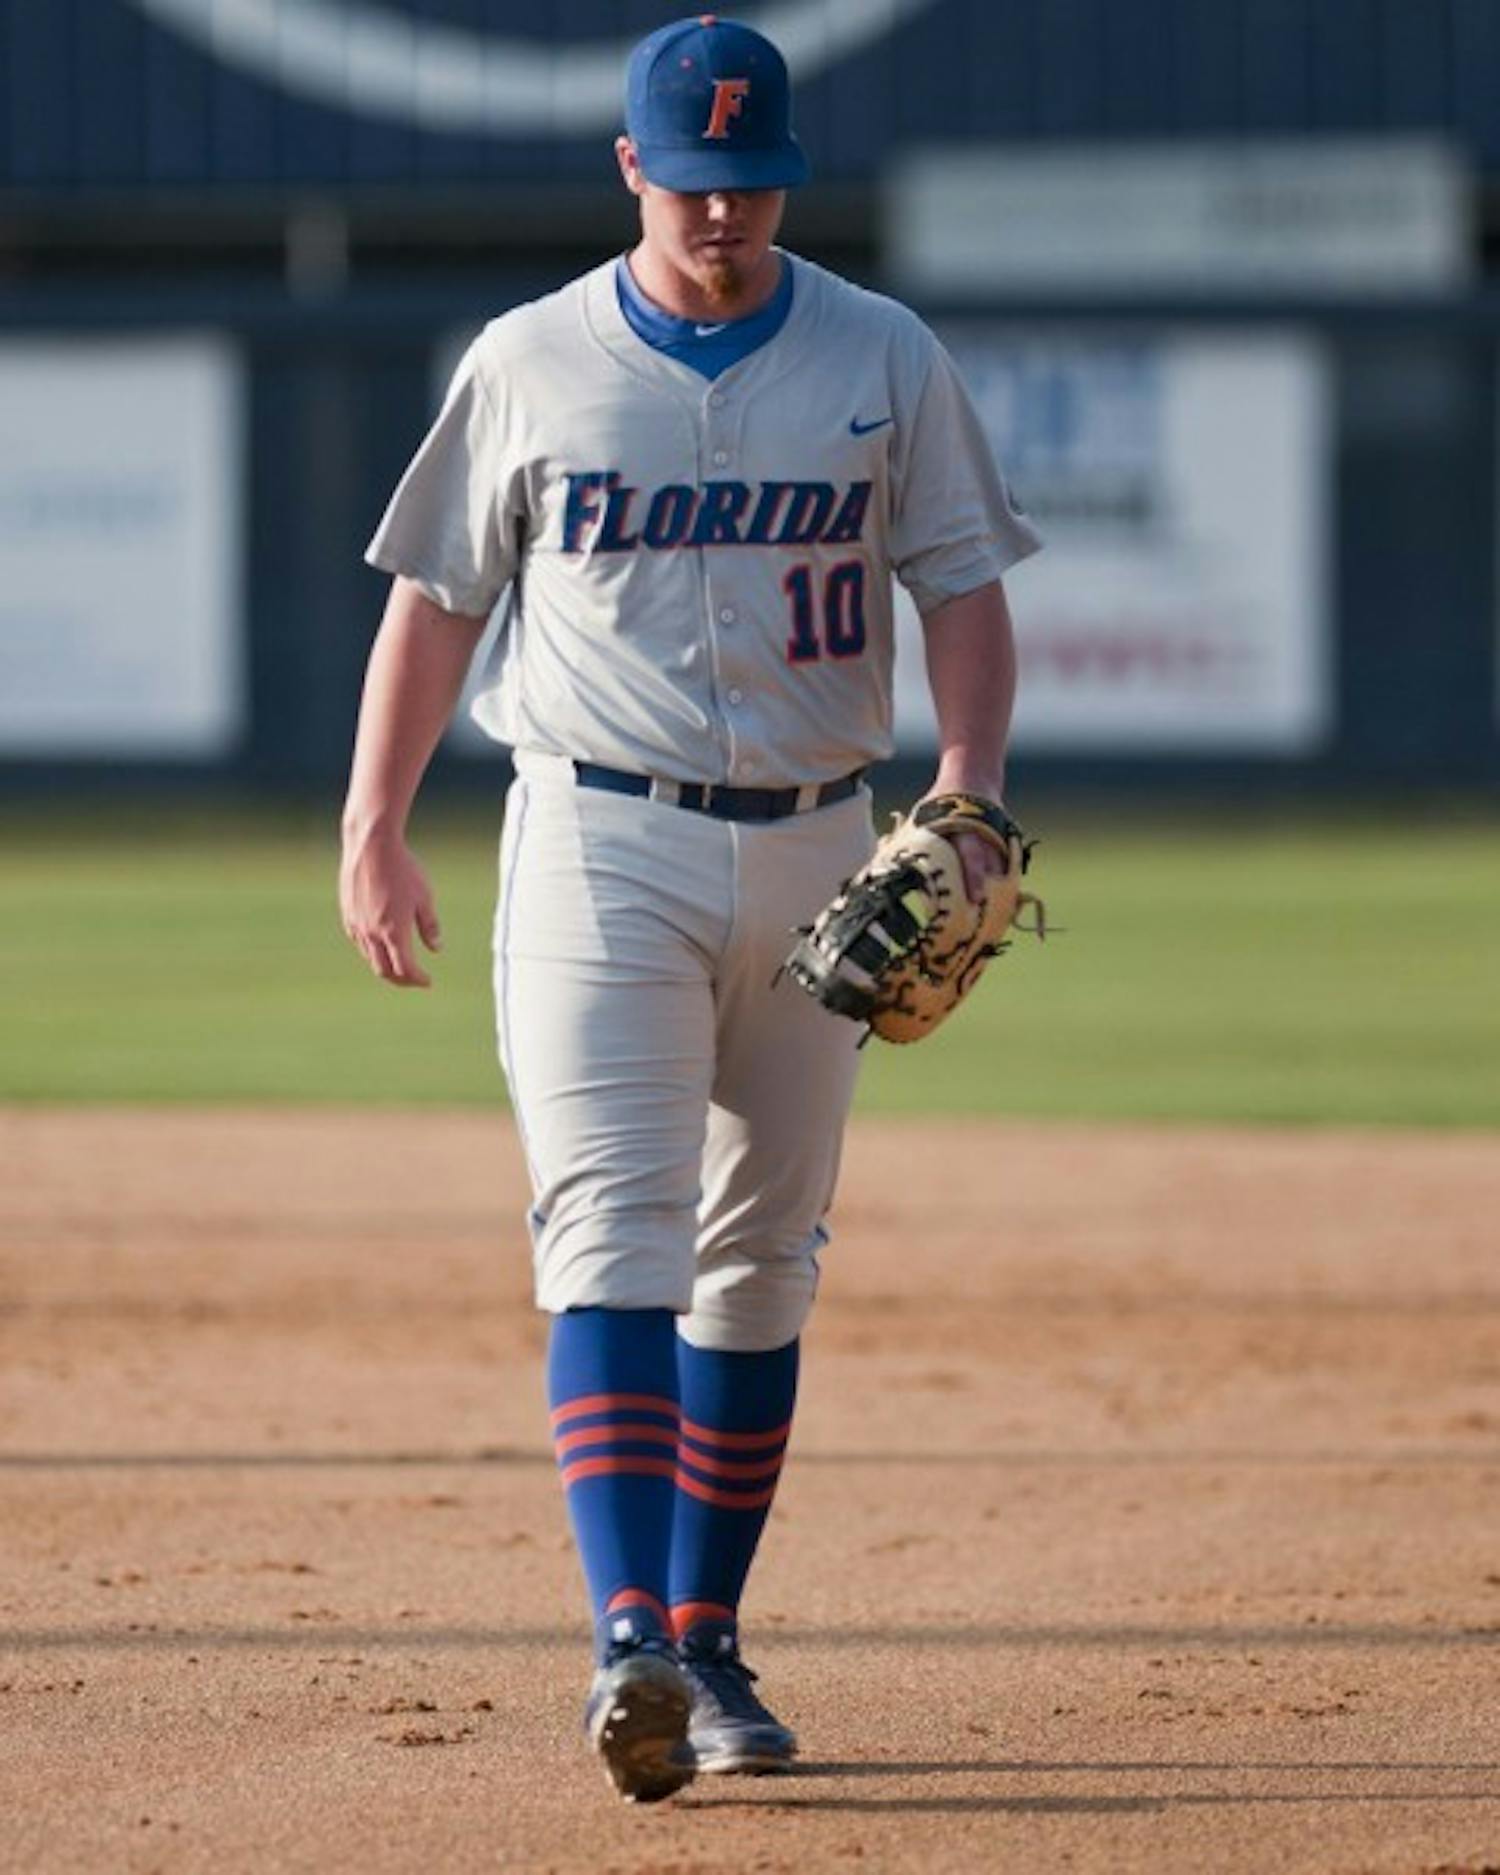 Florida first baseman and relief pitcher Austin Maddox walks off the field during UF’s 10-5 loss to North Florida on Tuesday. Maddox and the Gators combined to commit three errors.